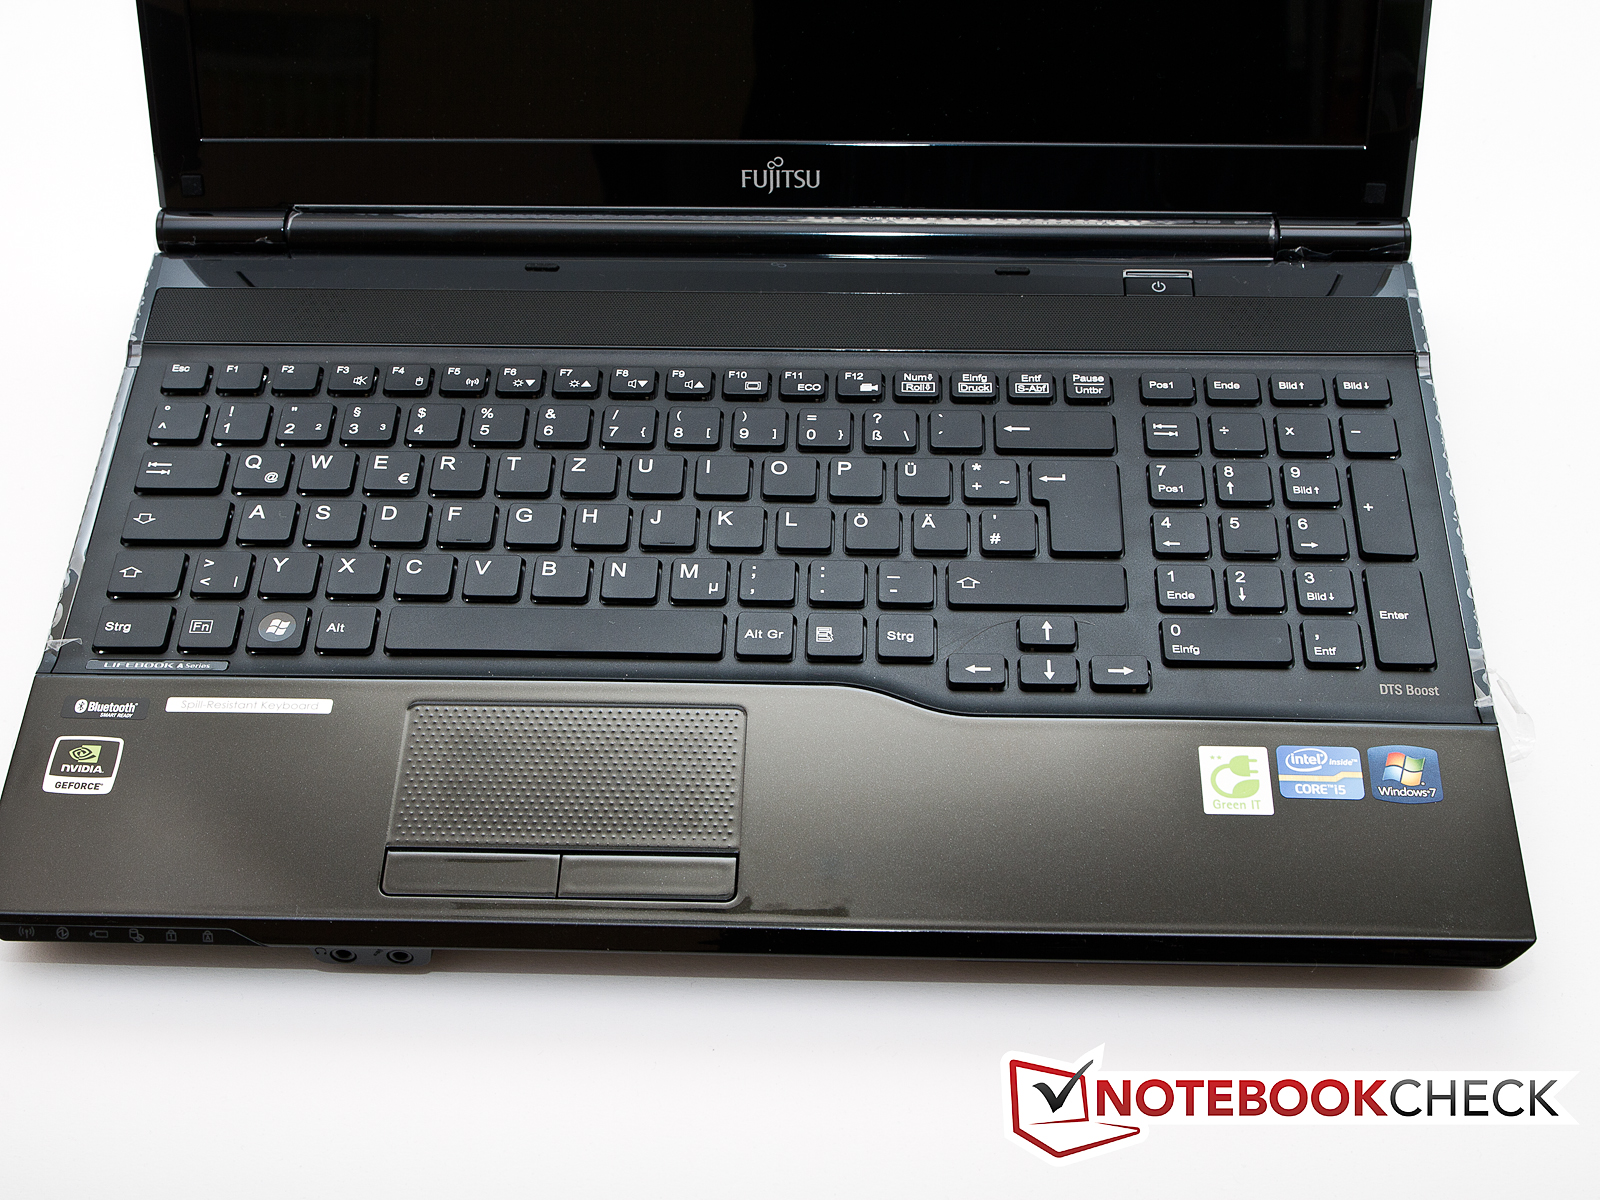 PC/タブレット ノートPC Review Fujitsu Lifebook AH532 Notebook - NotebookCheck.net Reviews